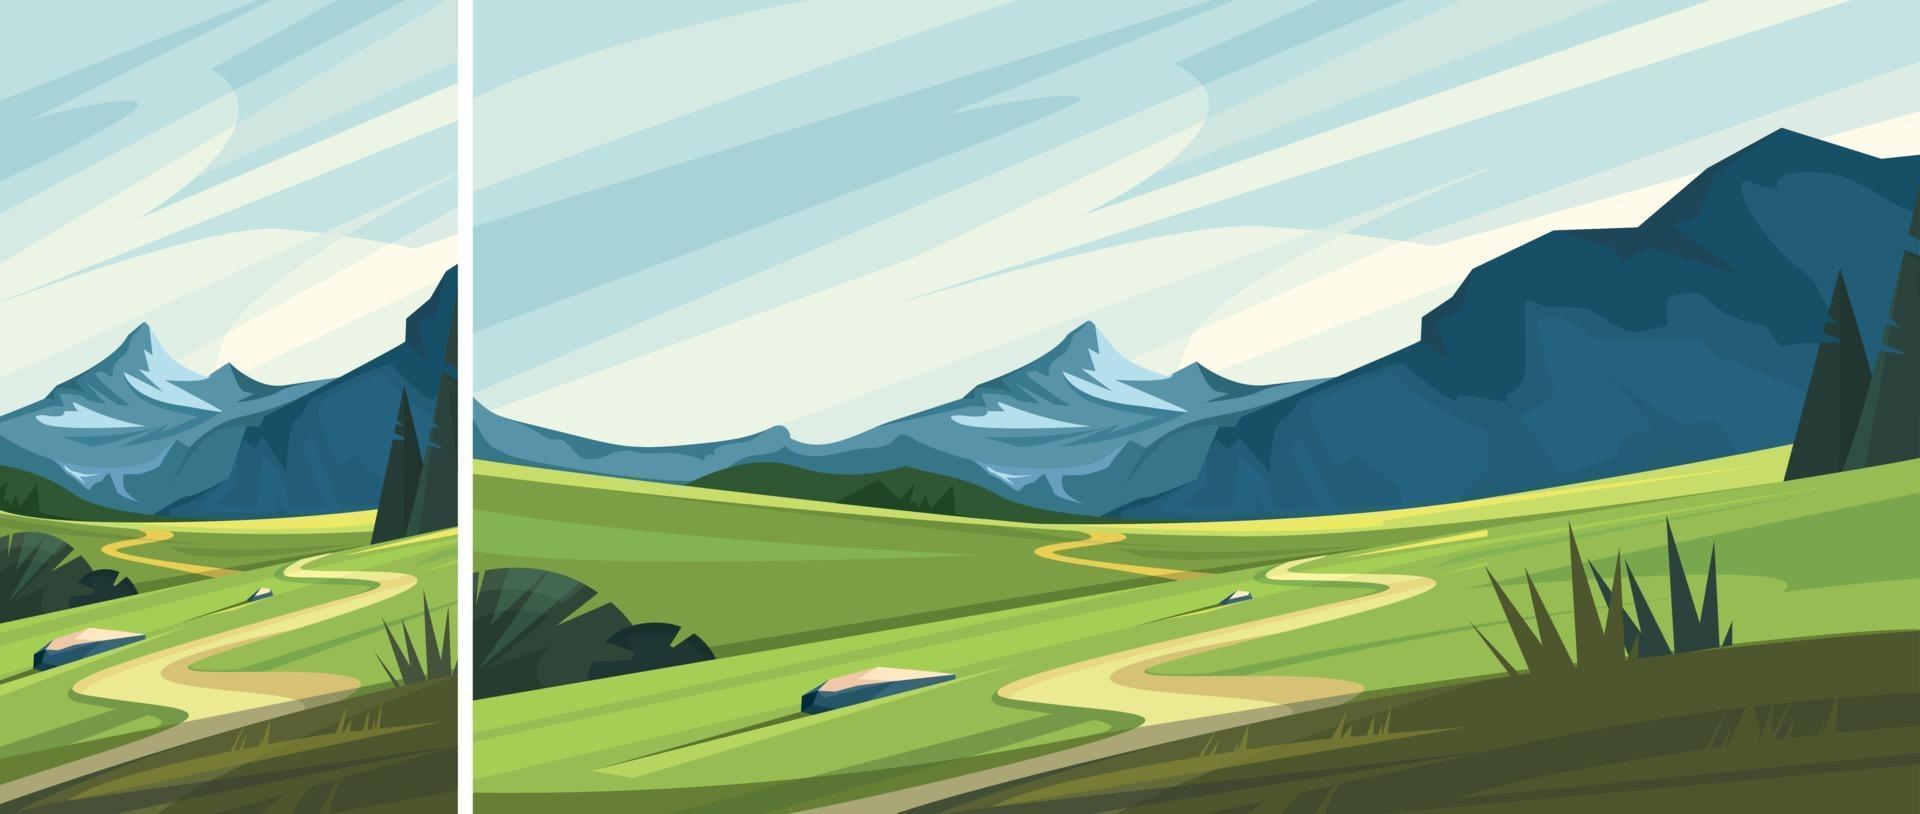 Mountain landscape with road vector